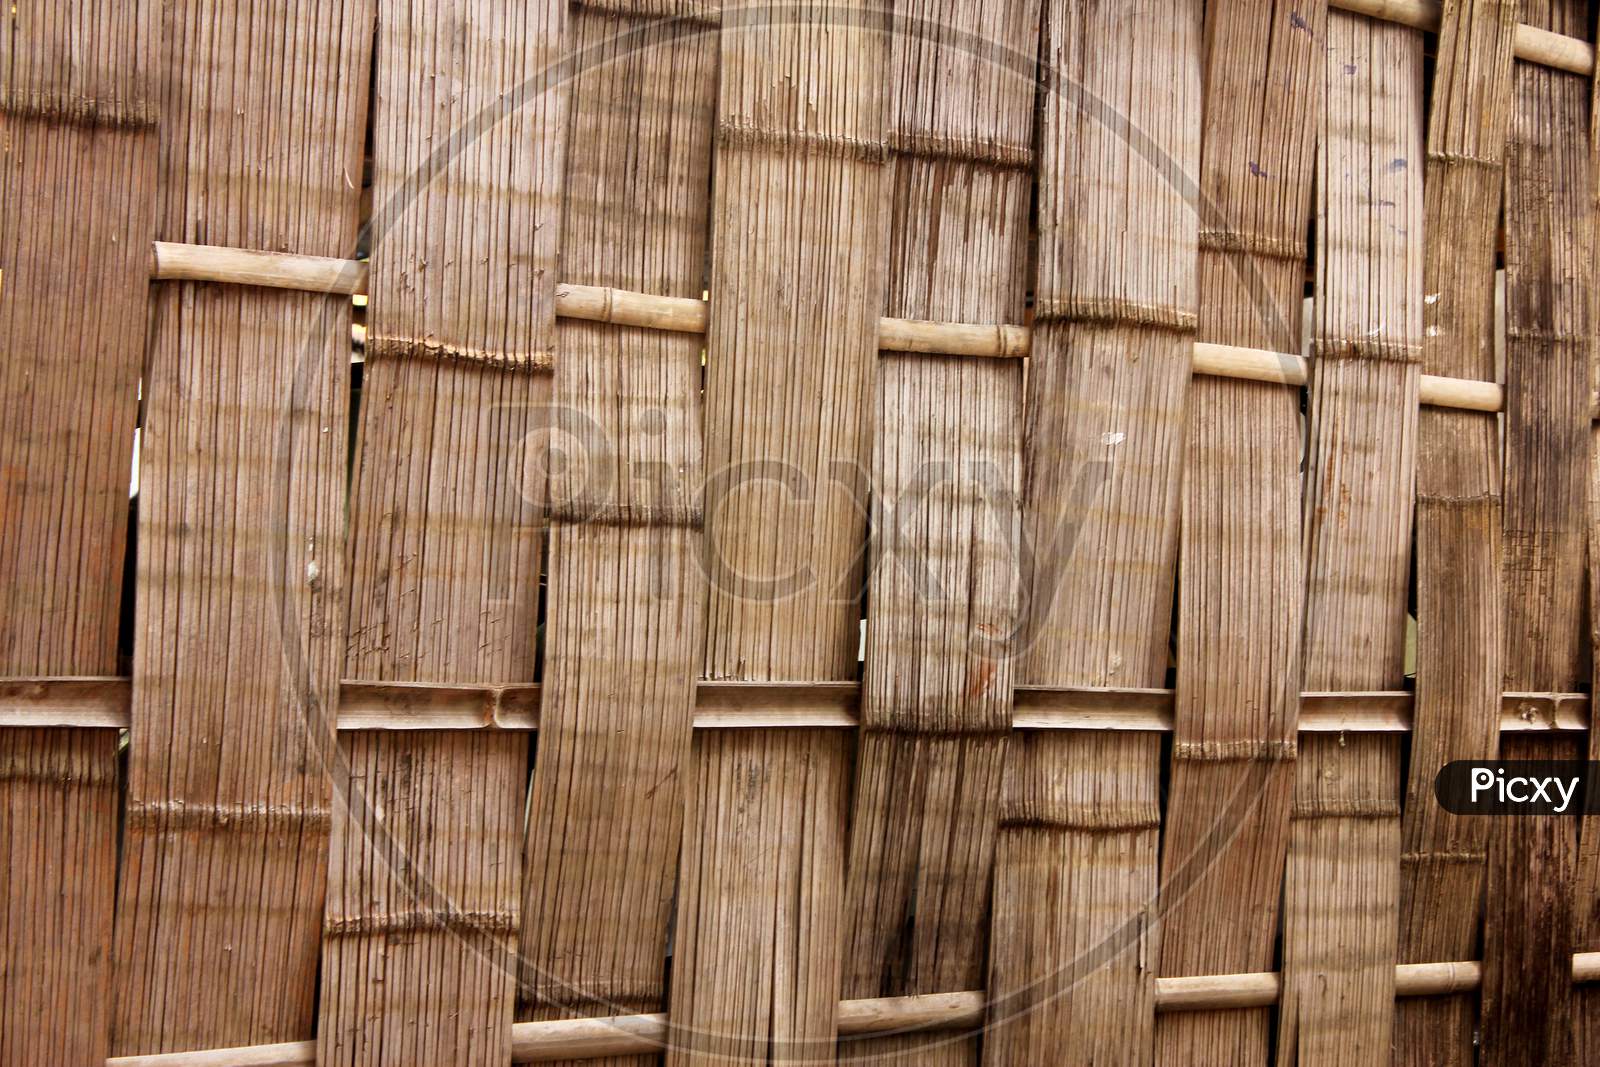 Bamboo crafted design